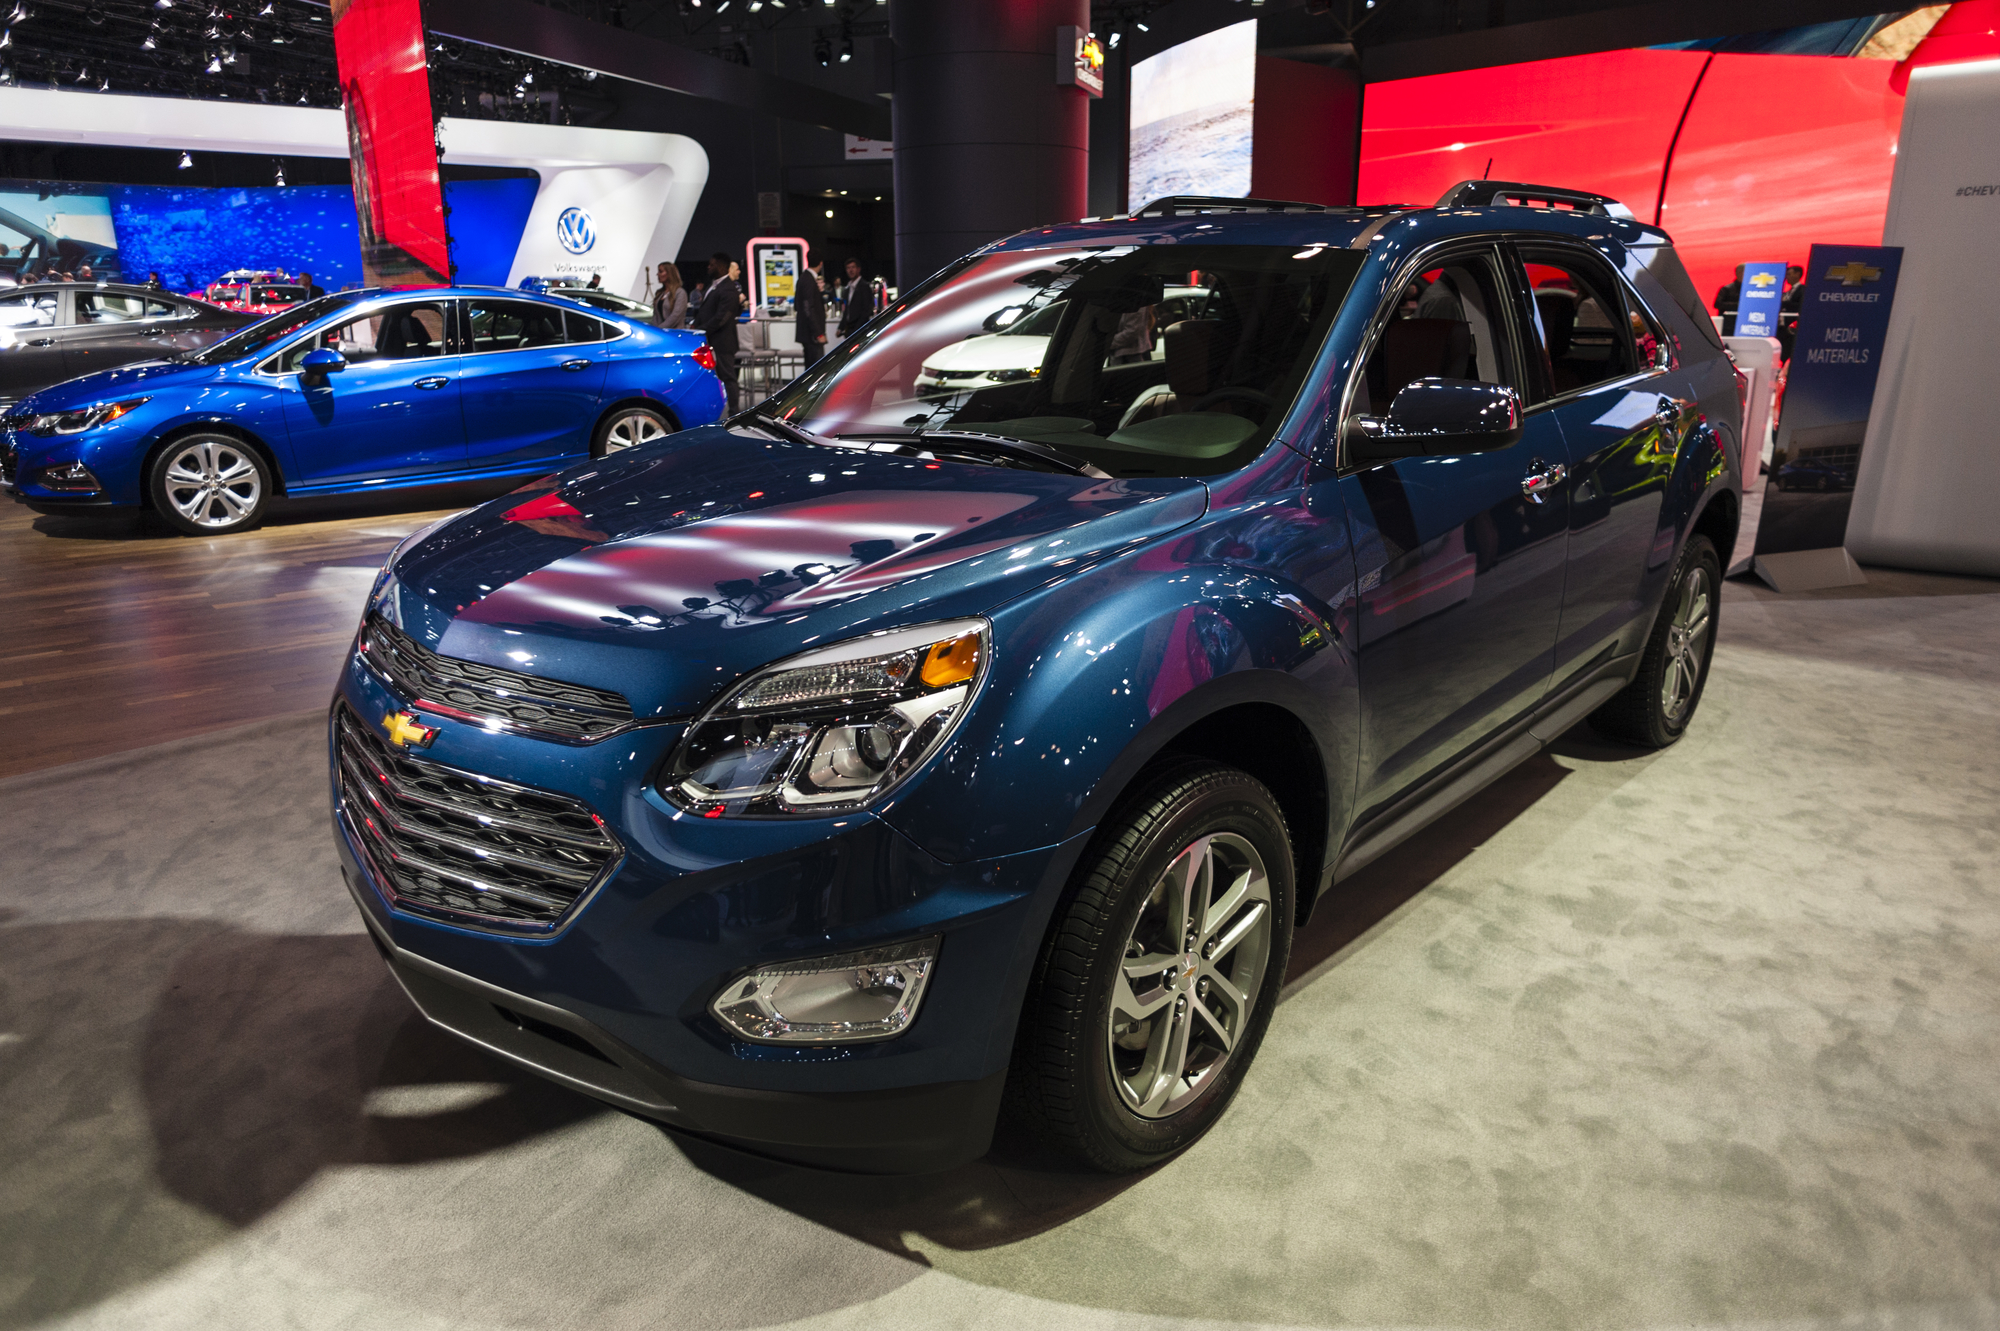 How much does a Chevrolet Equinox weigh?